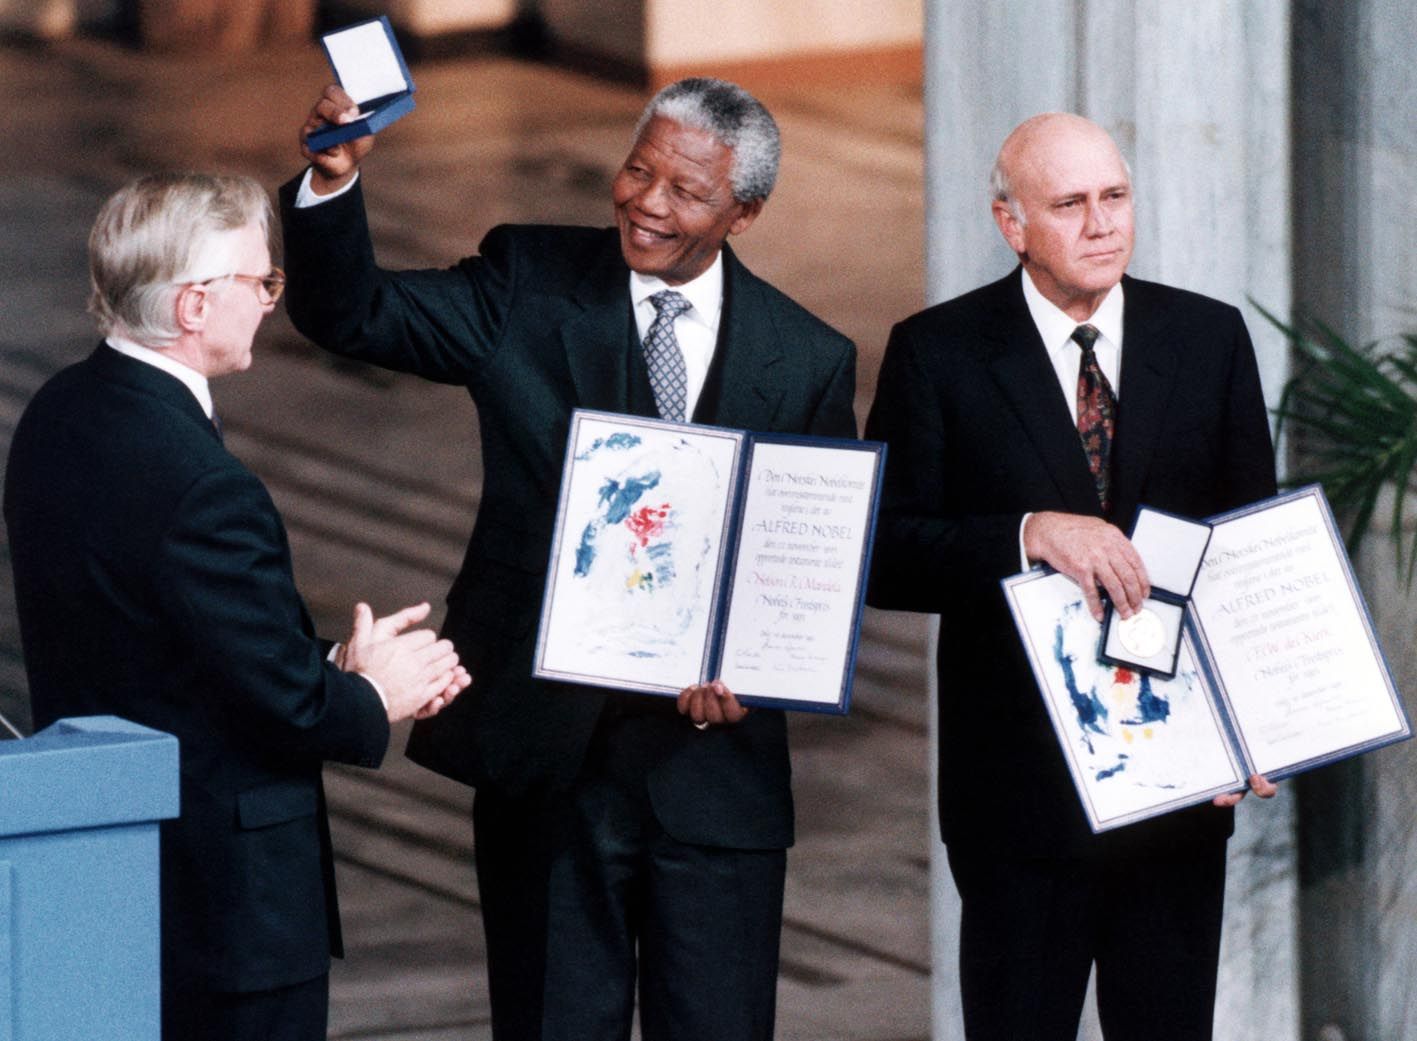 African National Congress leader Nelson Mandela holds up the medal and certificate after he was jointly awarded the 1993 Nobel Peace Prize with South African President FW de Klerk  in Oslo.